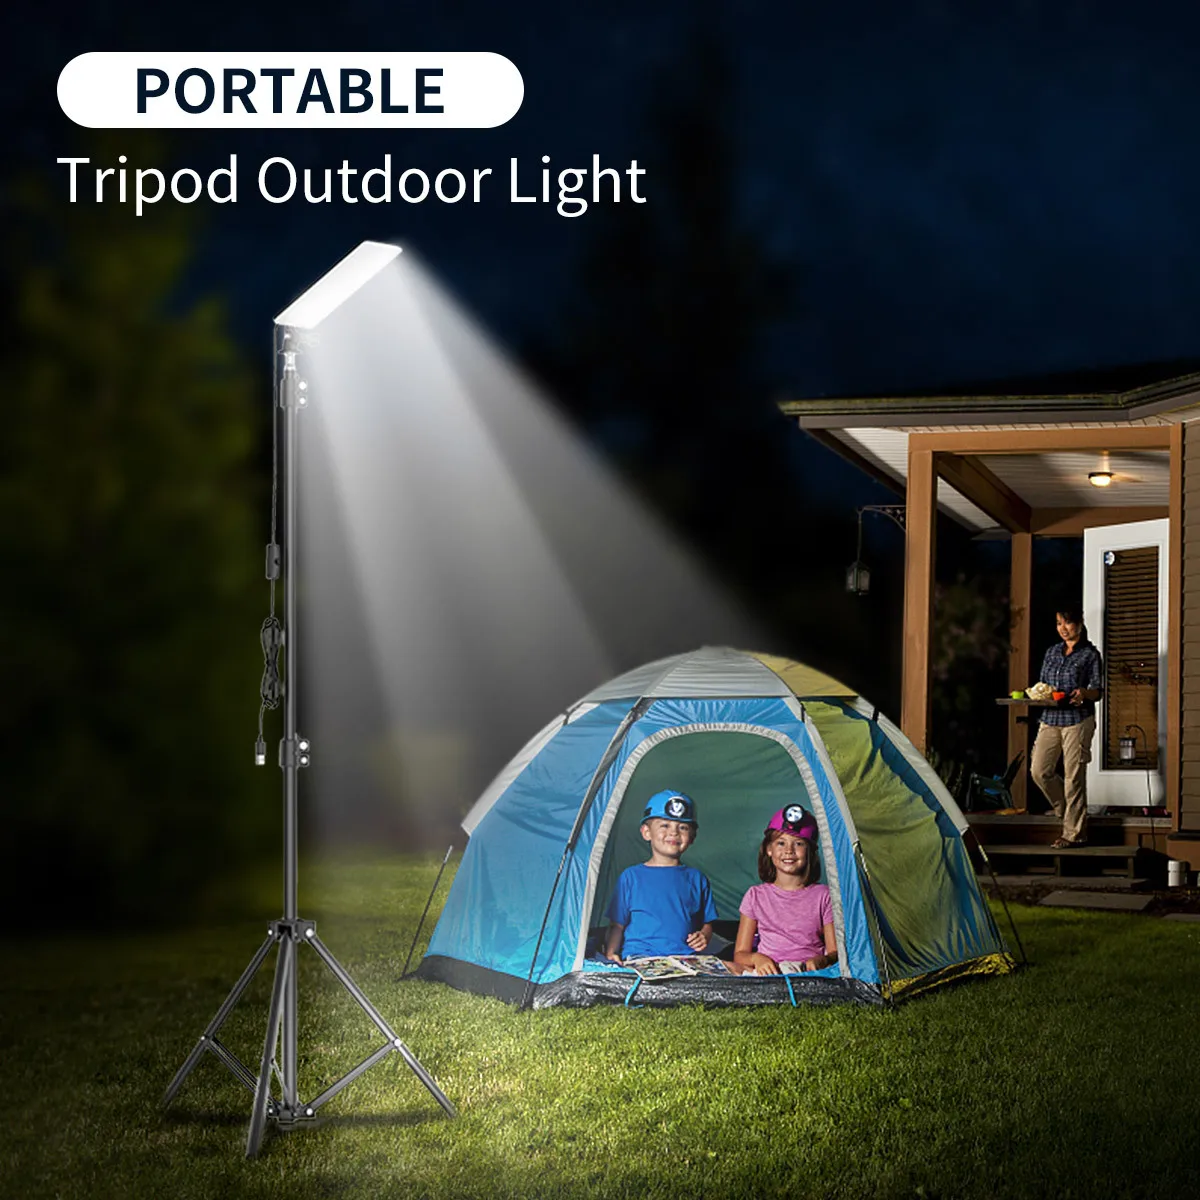 Video Light LED Selfie Light LED lamp With Tripod Stand for Outdoor Camping Picnic Live Stream Video Photos